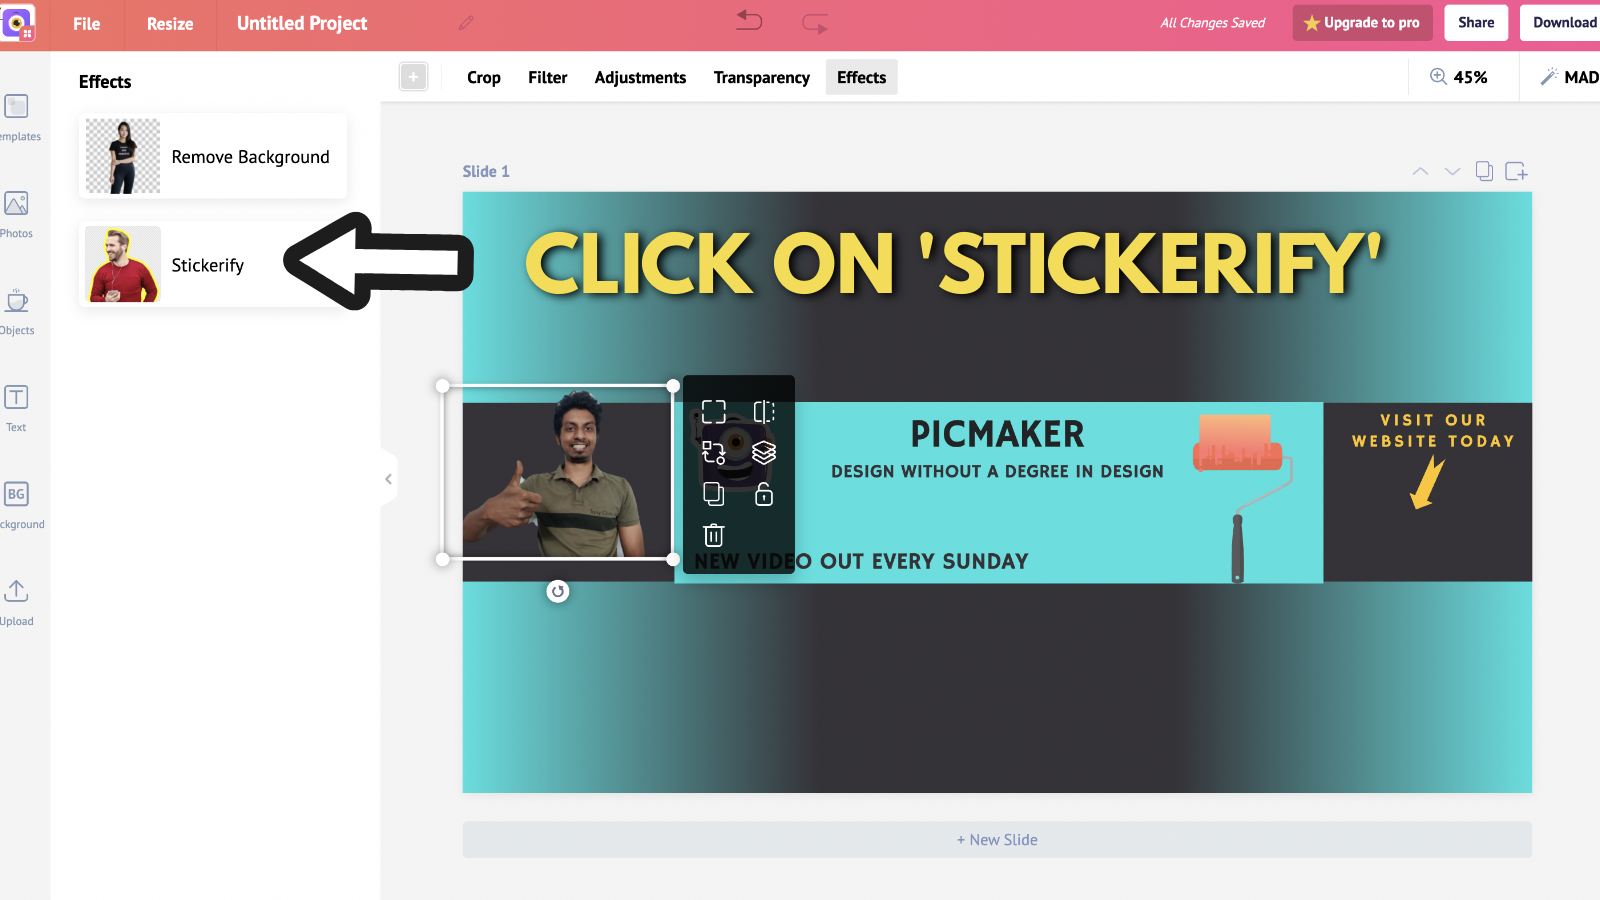 Screenshot of Picmaker's banner after clicking on the Stickerify tool